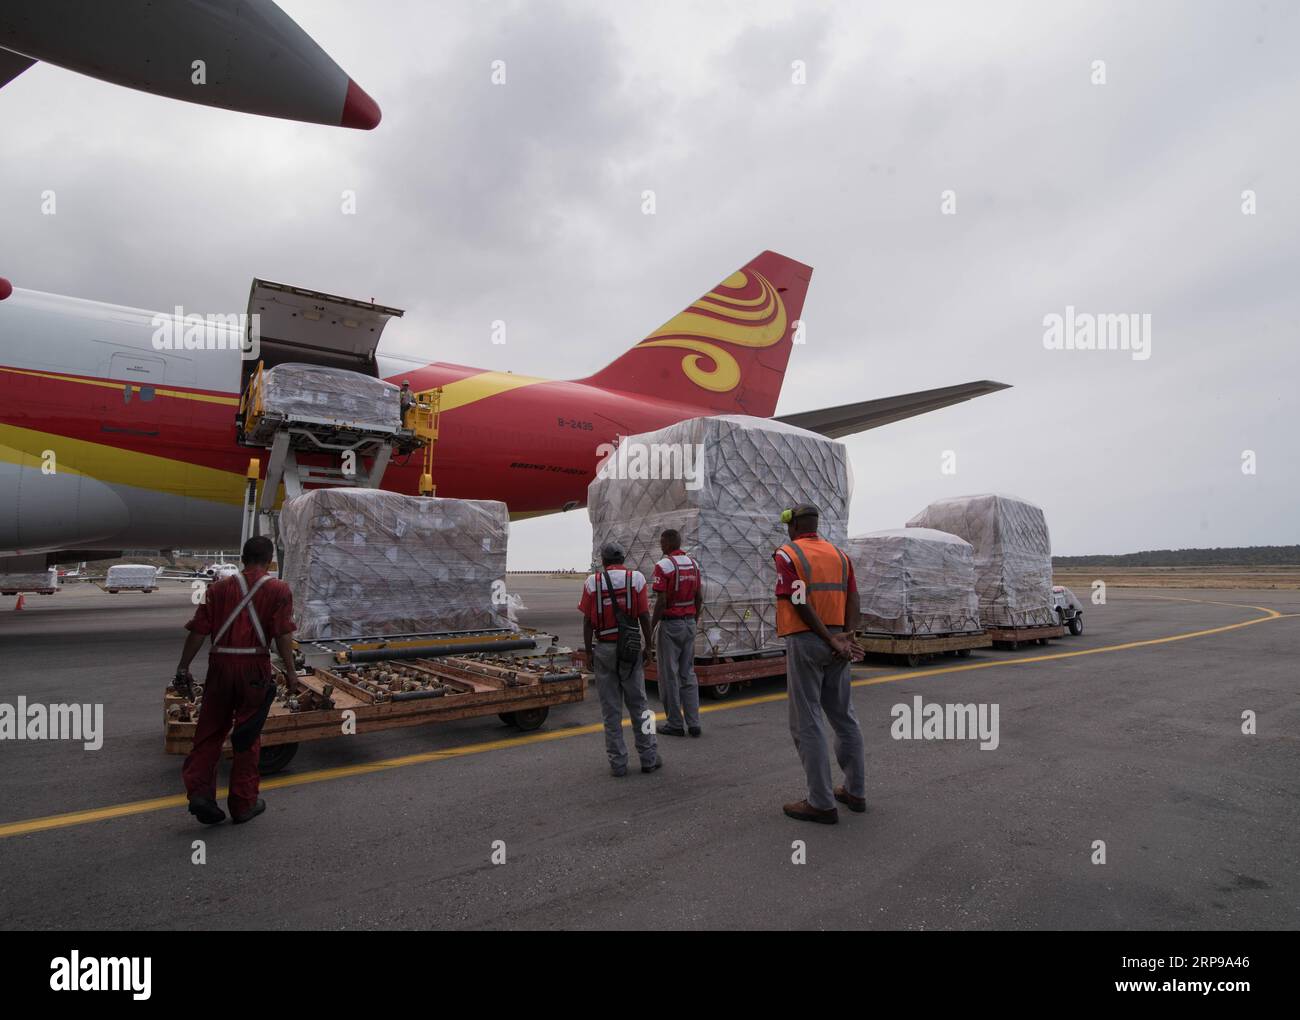 (190330) -- CARACAS, March 30, 2019 -- Chinese aids are unloaded from the plane at the Simon Bolivar International Airport in Maiquetia in the state of Vargas, Venezuela, on March 29, 2019. The Venezuelan government received on Friday medical aid from China. ) VENEZUELA-CARACAS-CHINA-MEDICAL AID MarcosxSalgado PUBLICATIONxNOTxINxCHN Stock Photo